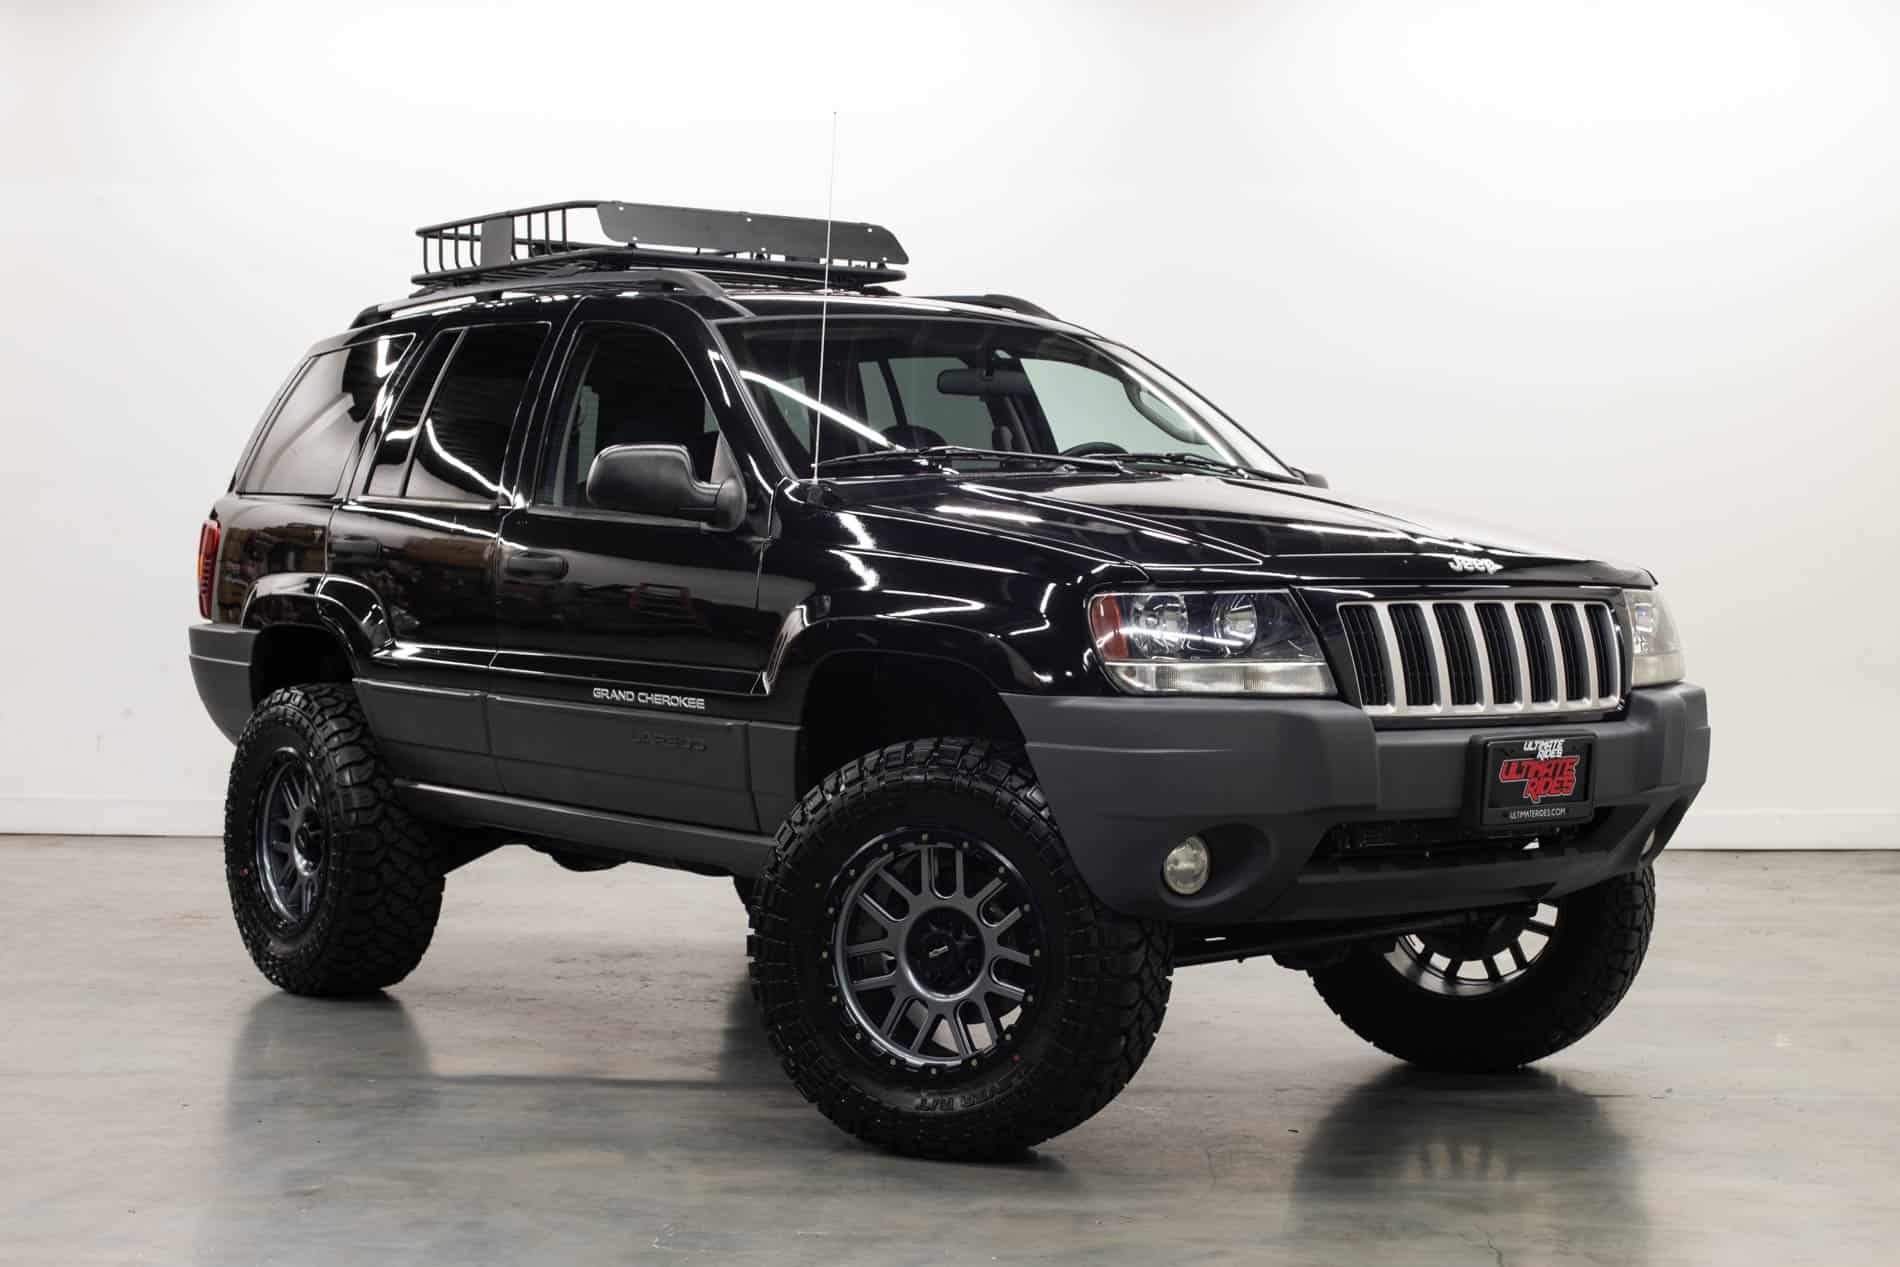 Custom Off Road Vehicles for Sale